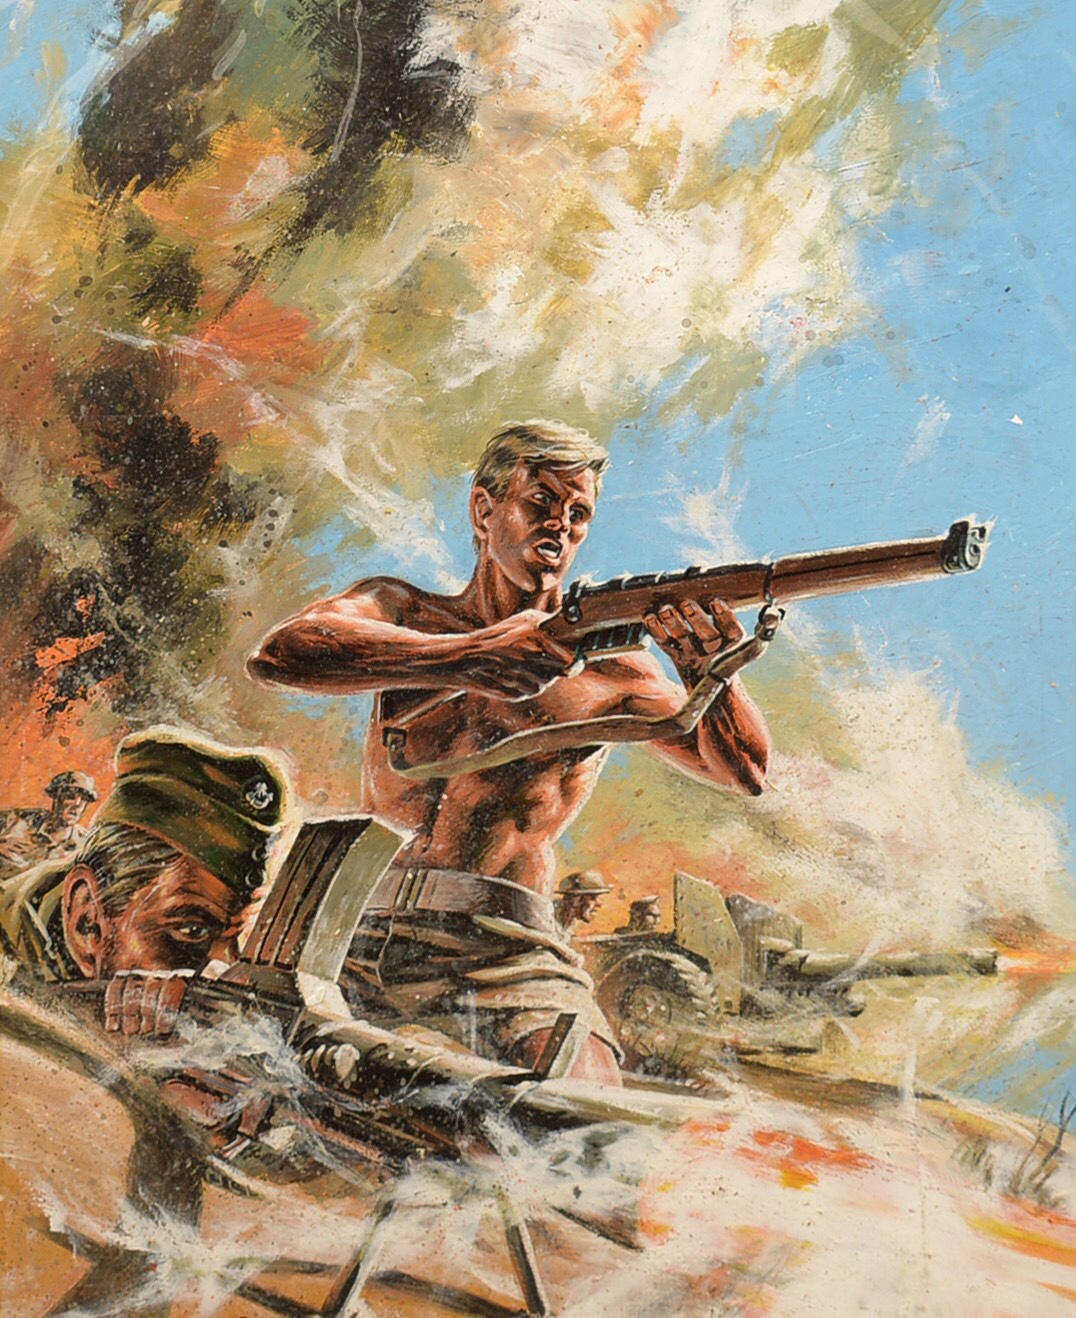 Original Art Work for the front cover of War Picture Library, No. 928 'The Rifleman', by Oliver Frey, gouache on board, 35 x 28cms, unframed